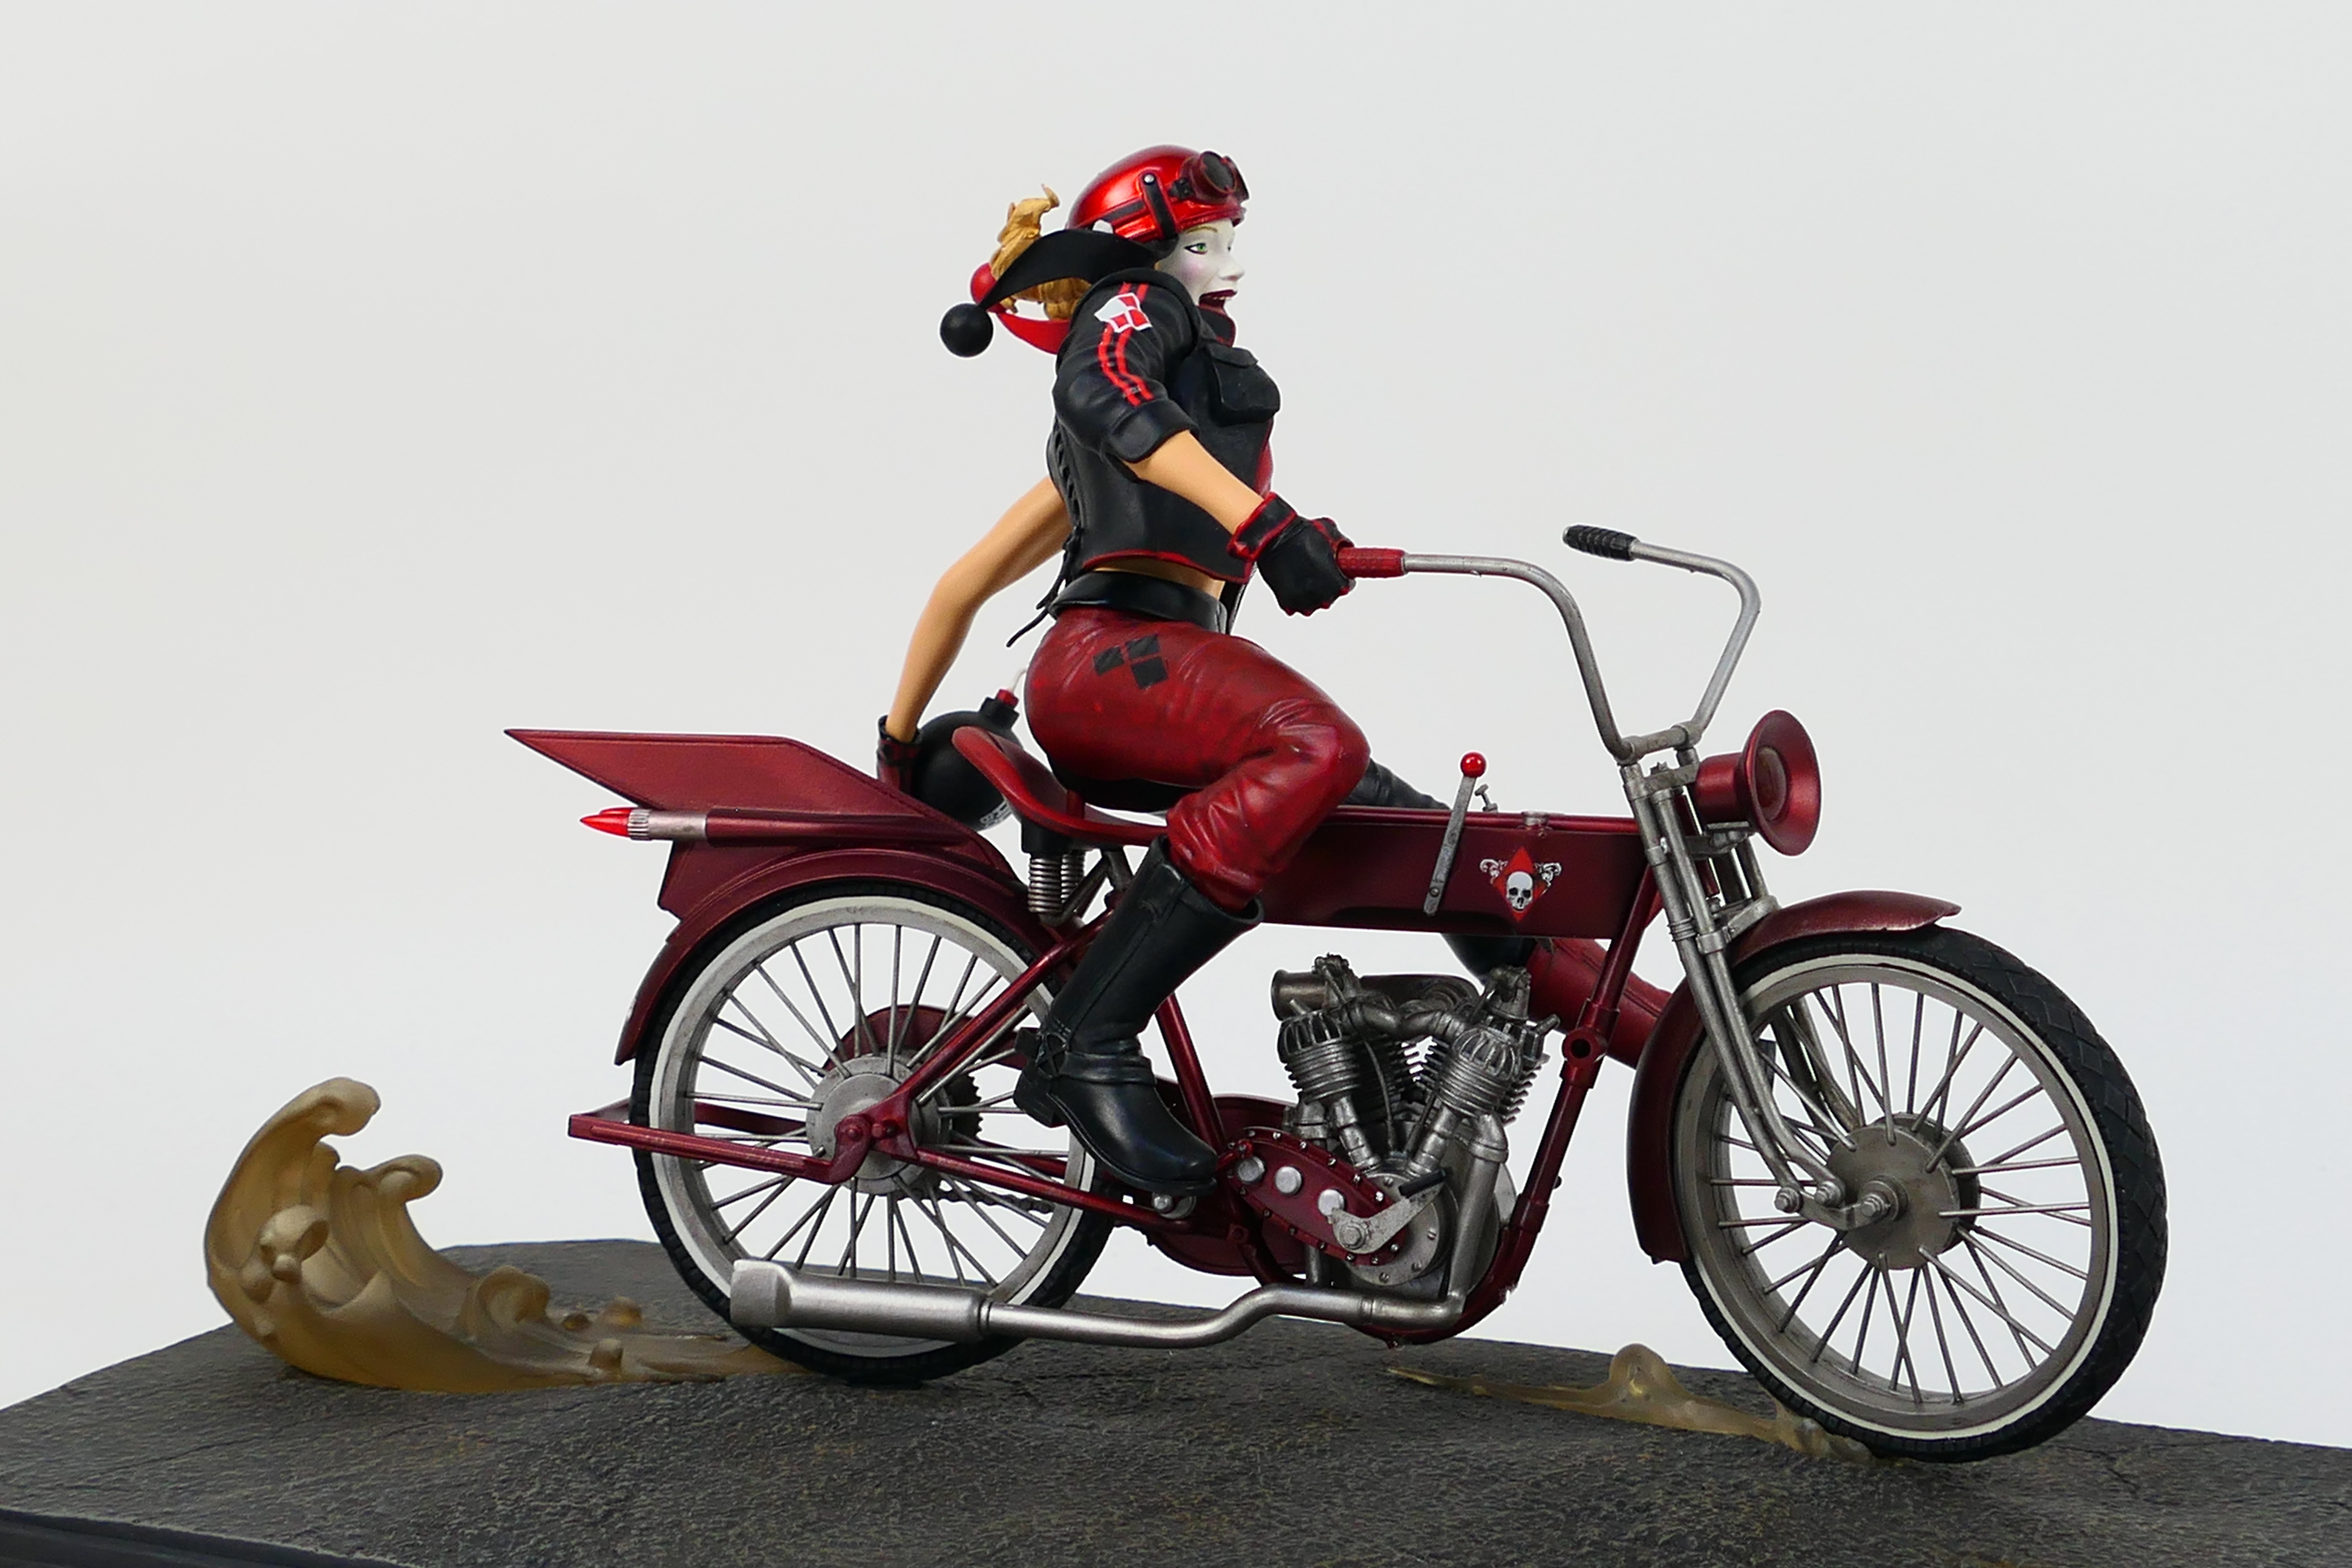 DC Collectibles - Harley Quinn - A limited edition Gotham City Garage Harley Quinn on motorcycle - Image 5 of 8